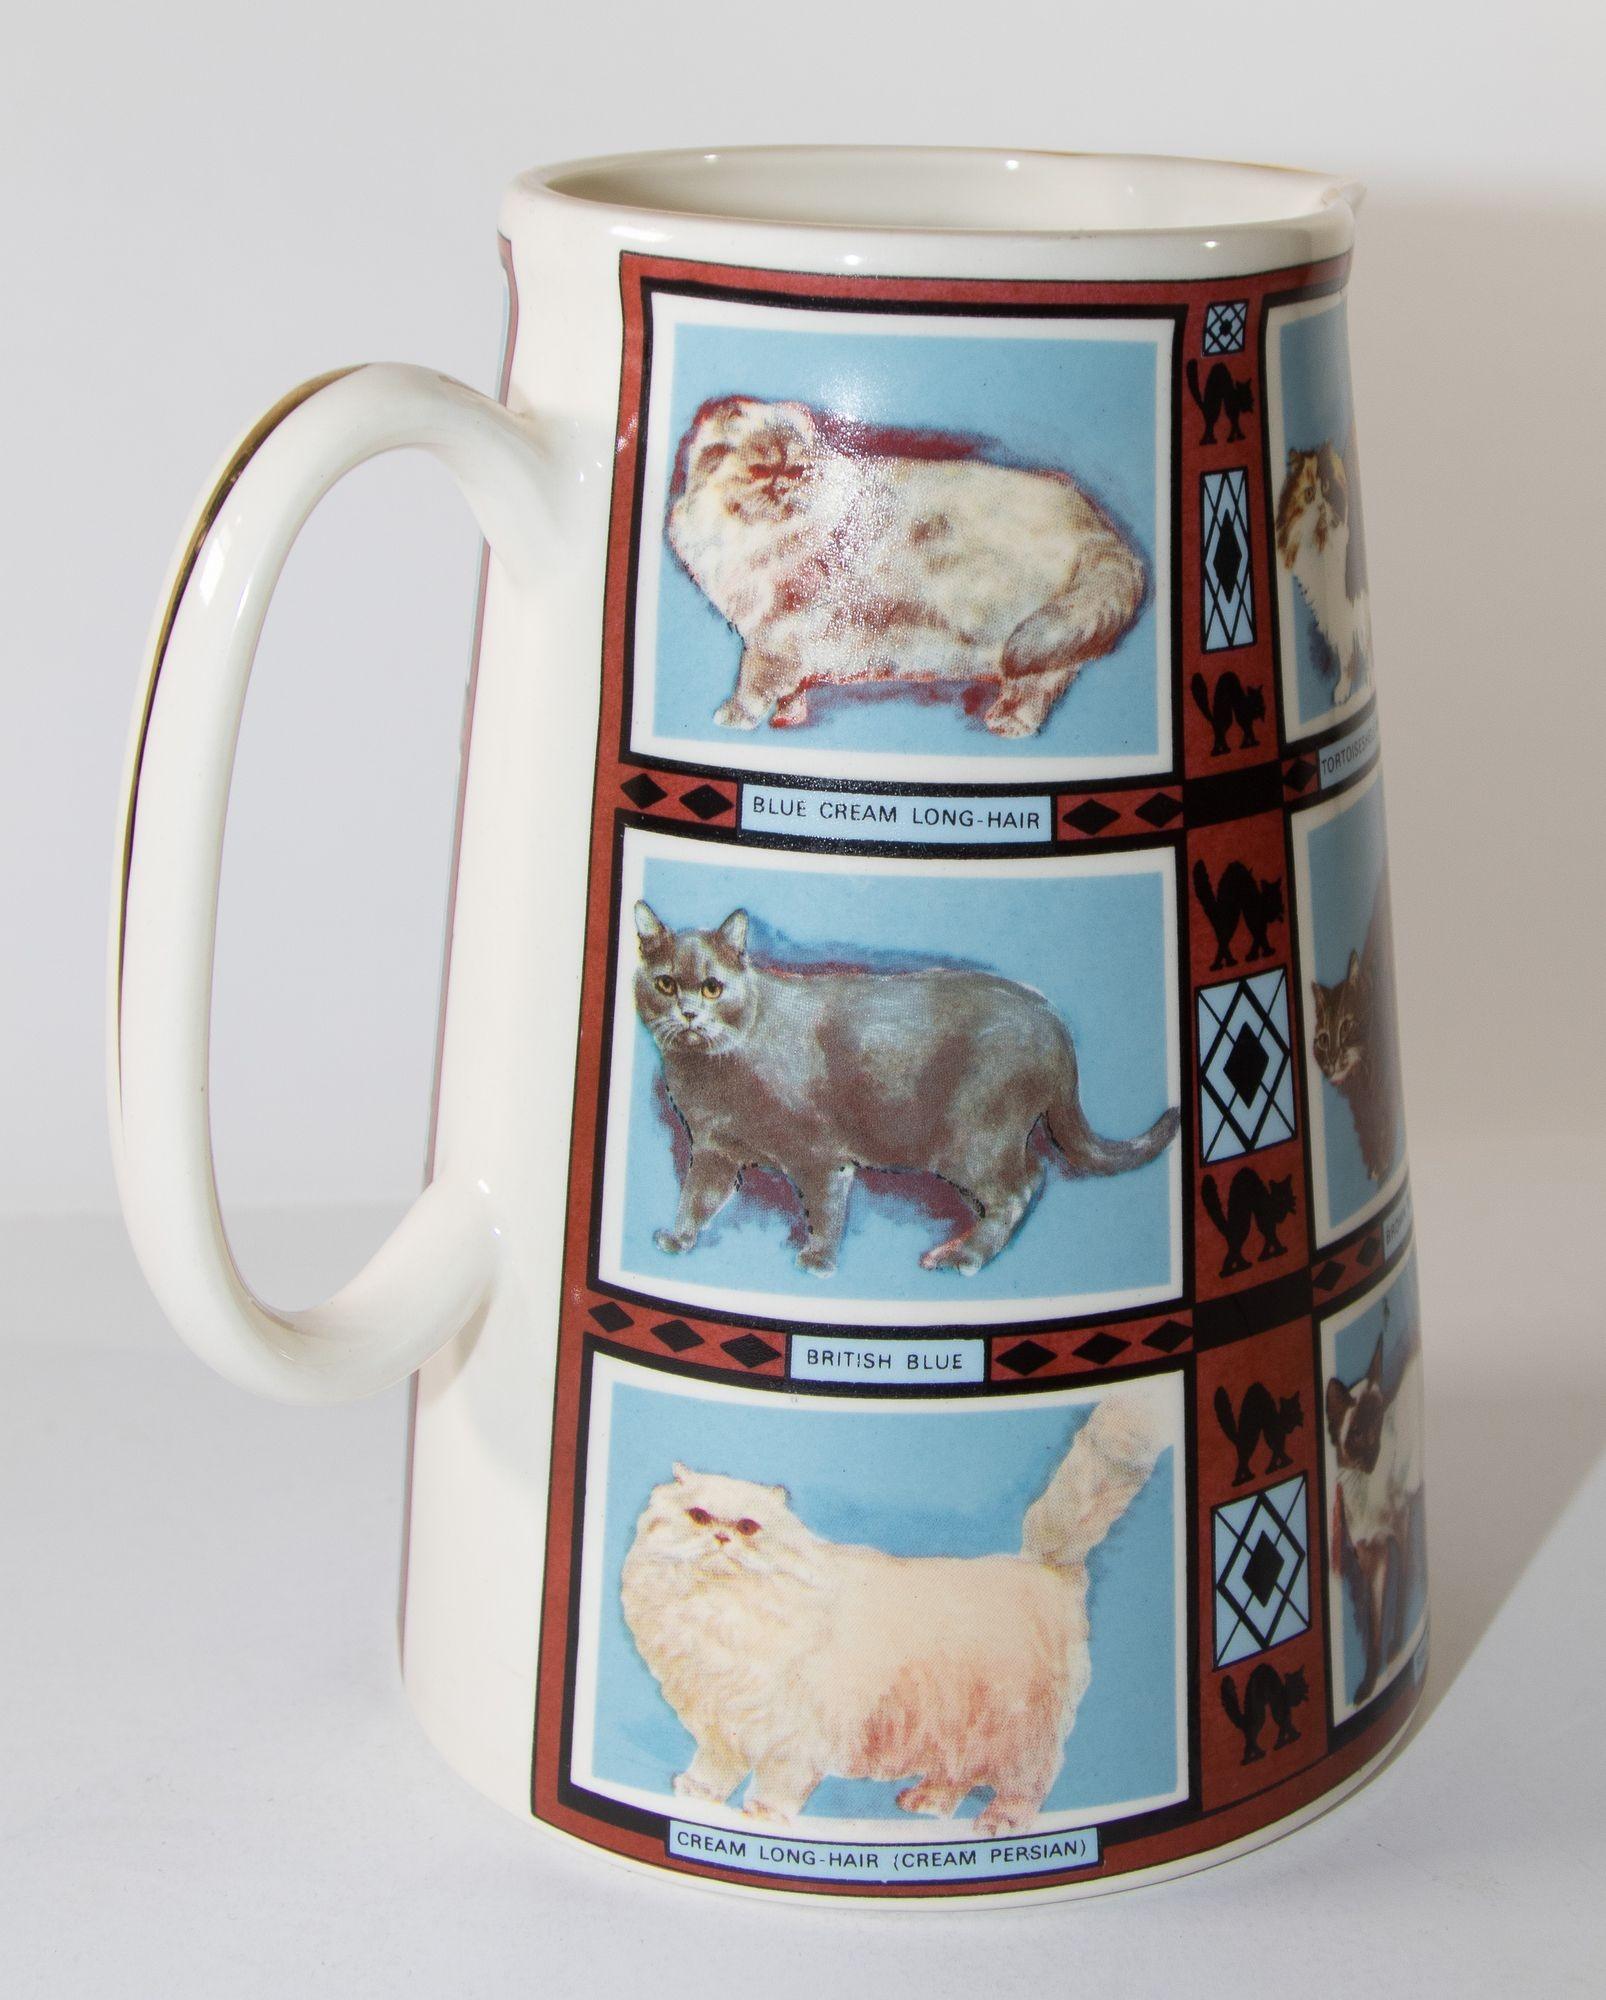 Victorian Vintage 1970s Ceramic Pitcher, Derbyshire England with Cat Breeds Pictures